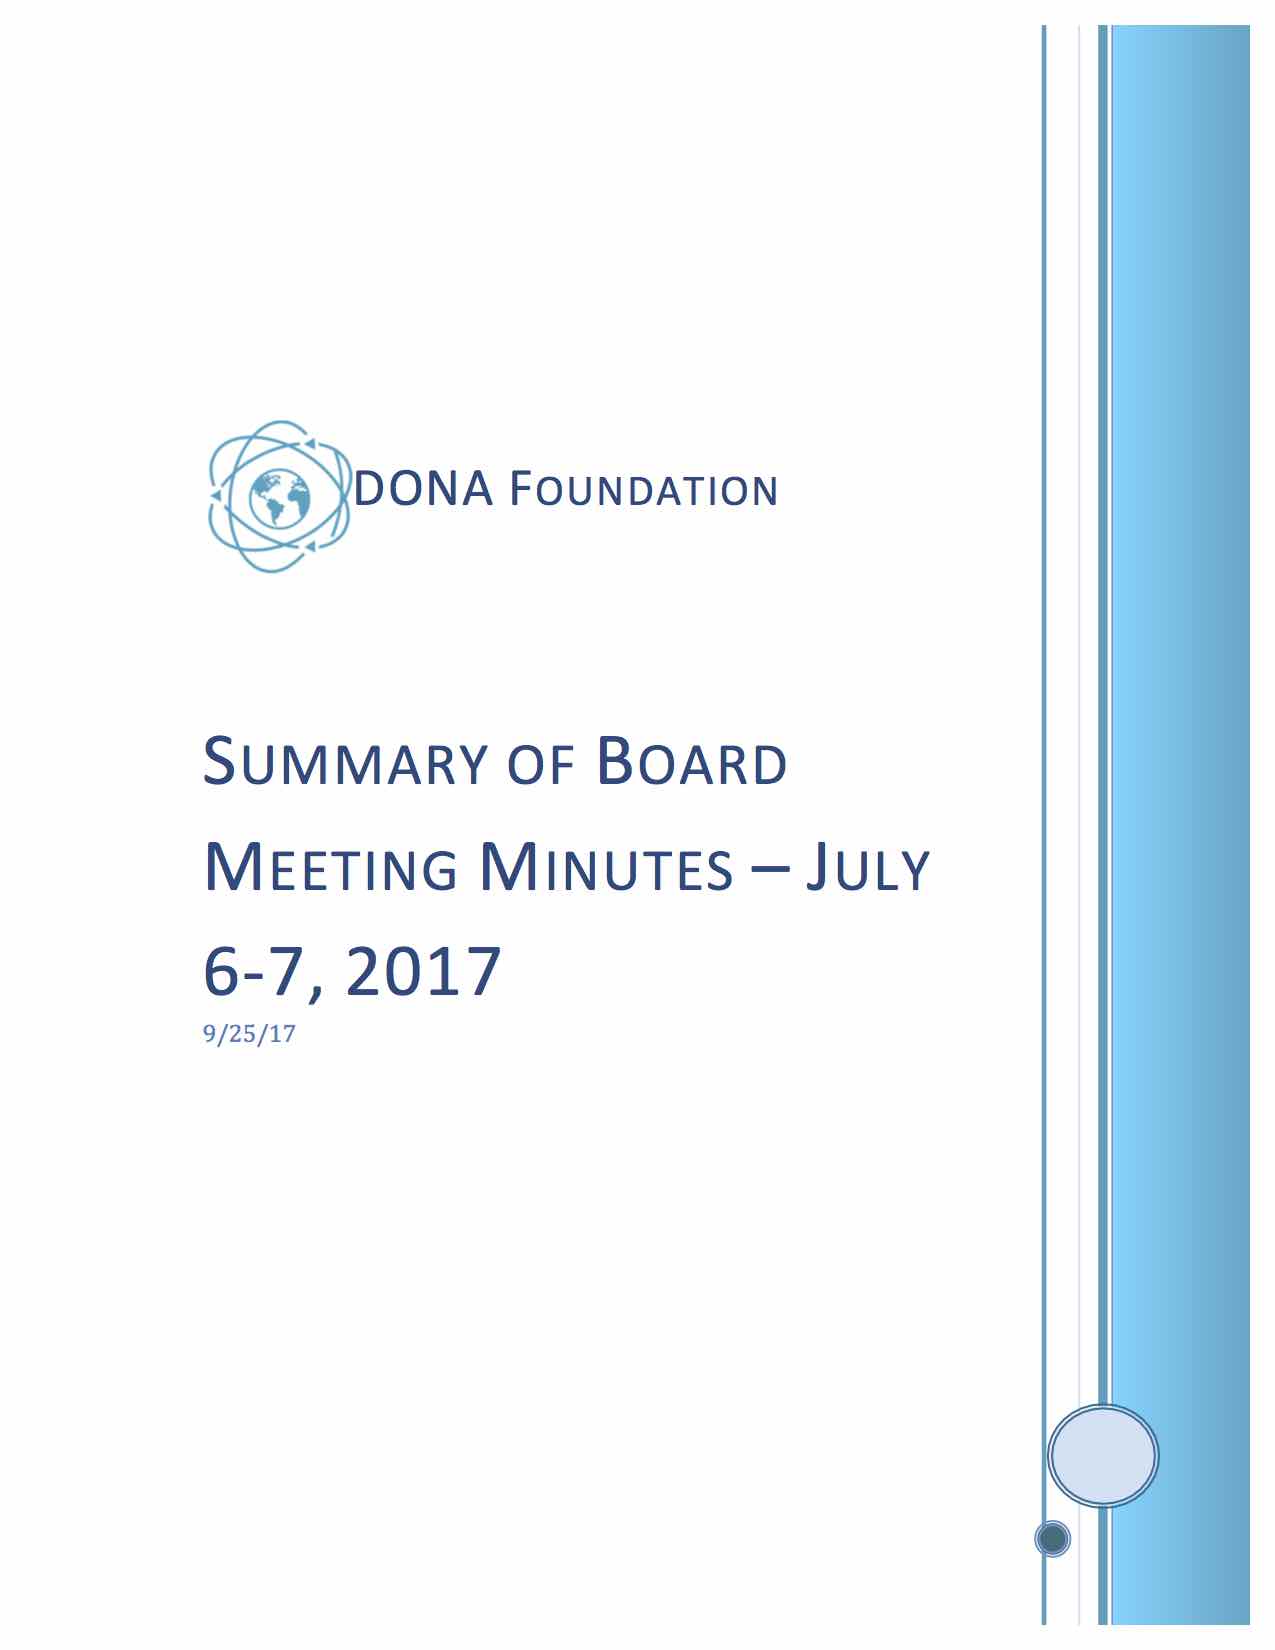 Summary of Board Minutes July 6-7, 2017